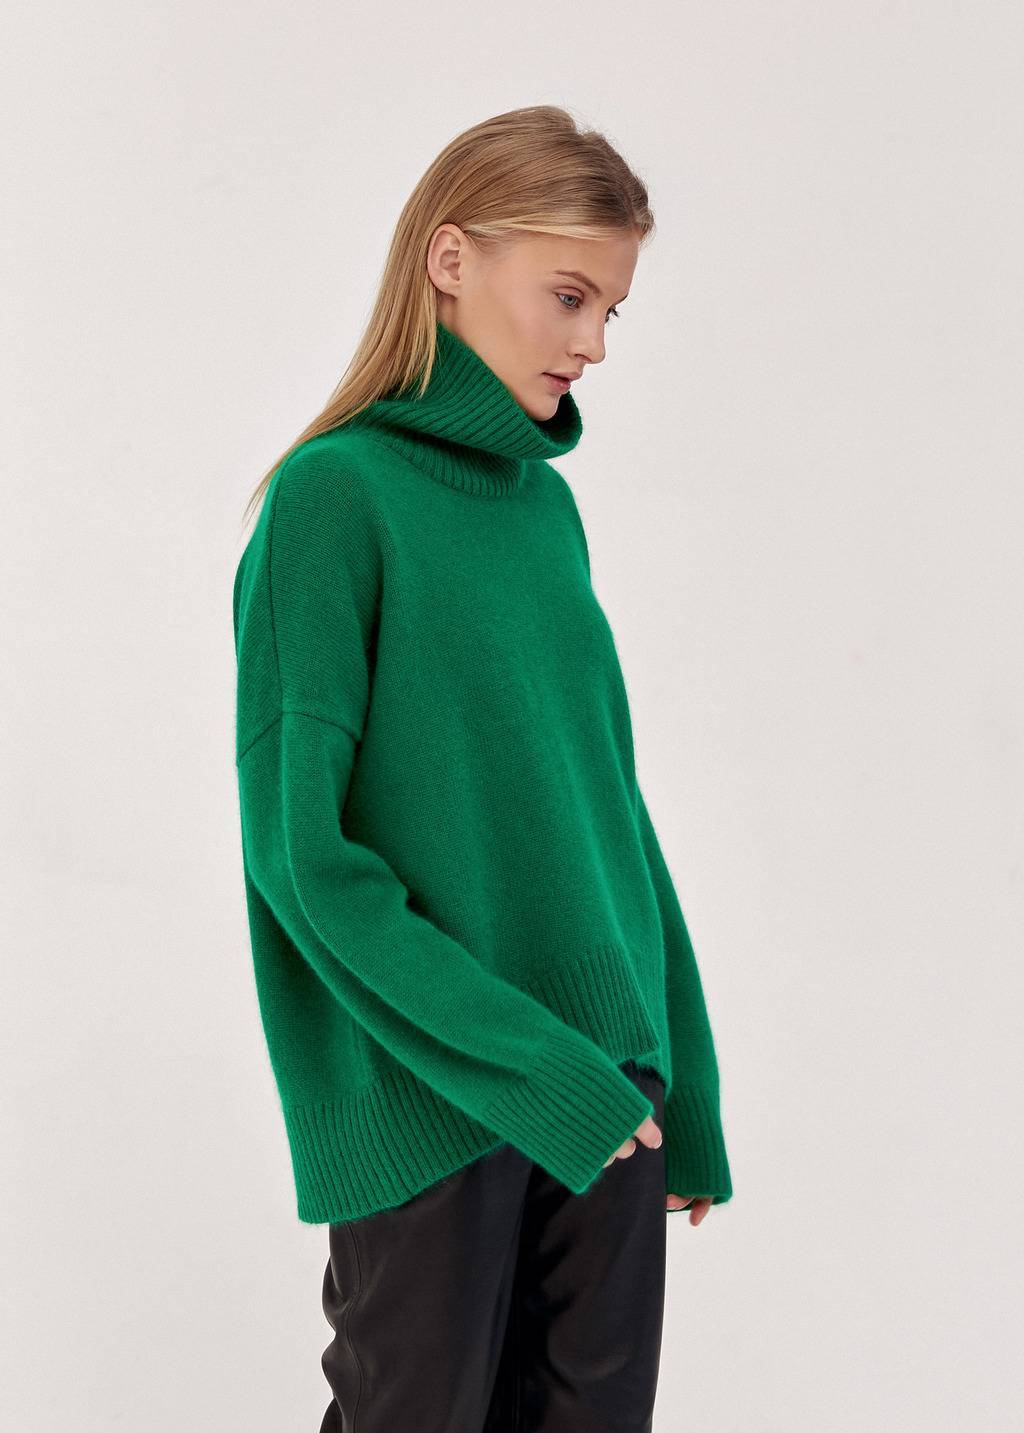 Cashmere > Oversized extremely soft 100% cashmere sweater Buy from 